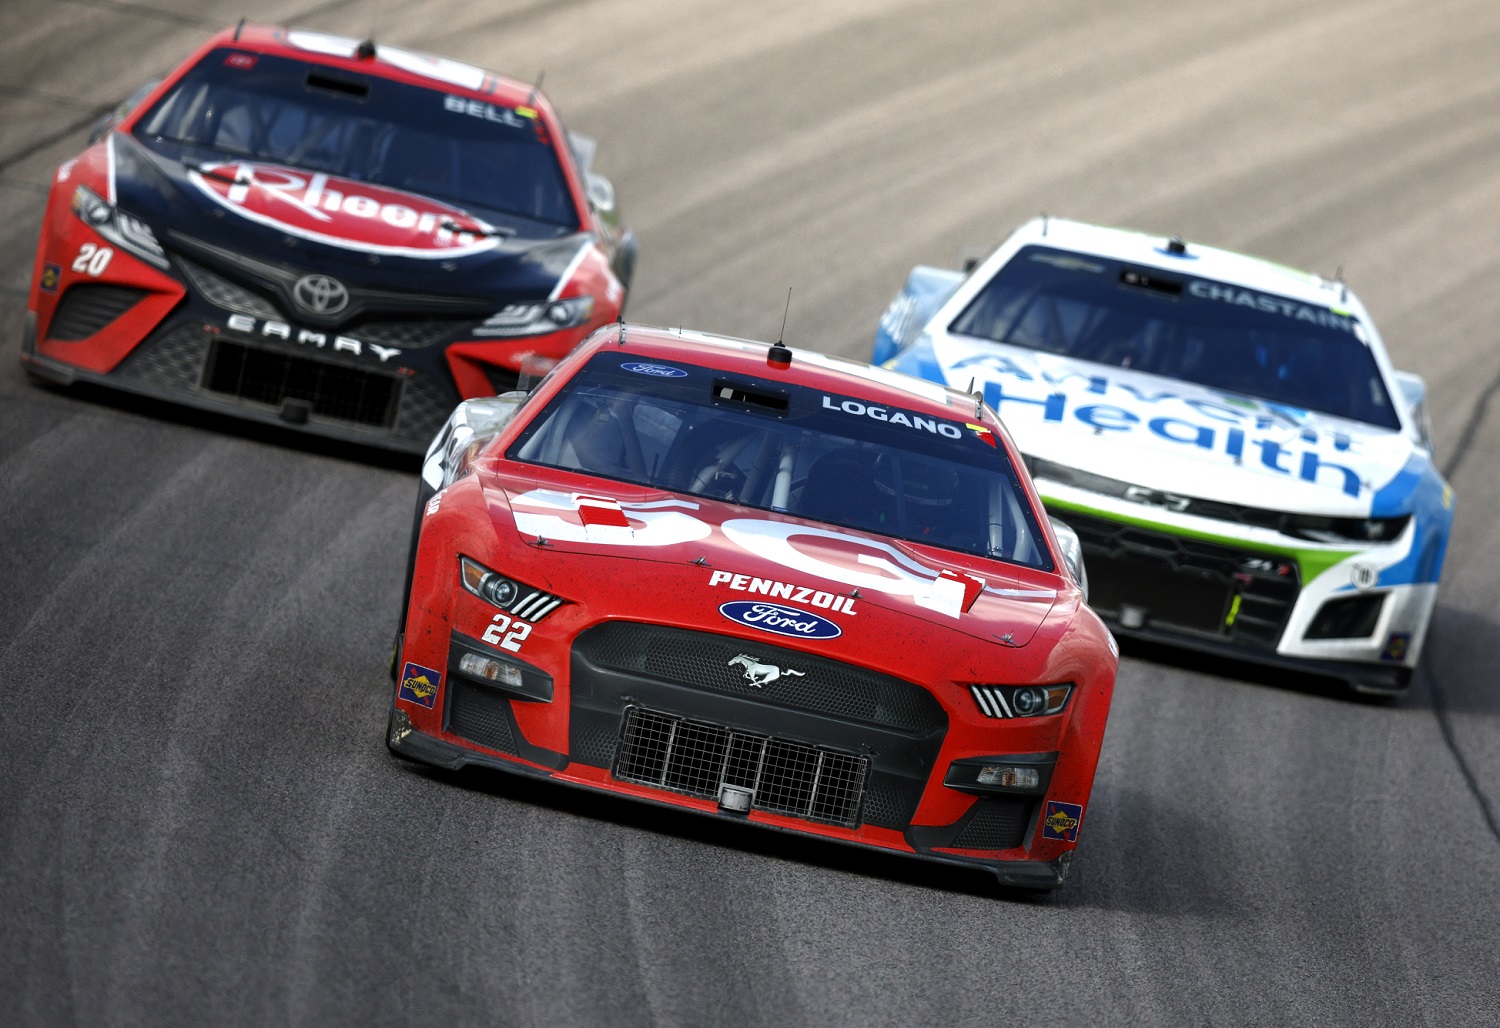 Joey Logano Christopher Bell, and Ross Chastain race during the NASCAR Cup Series AdventHealth 400 at Kansas Speedway on May 15, 2022.